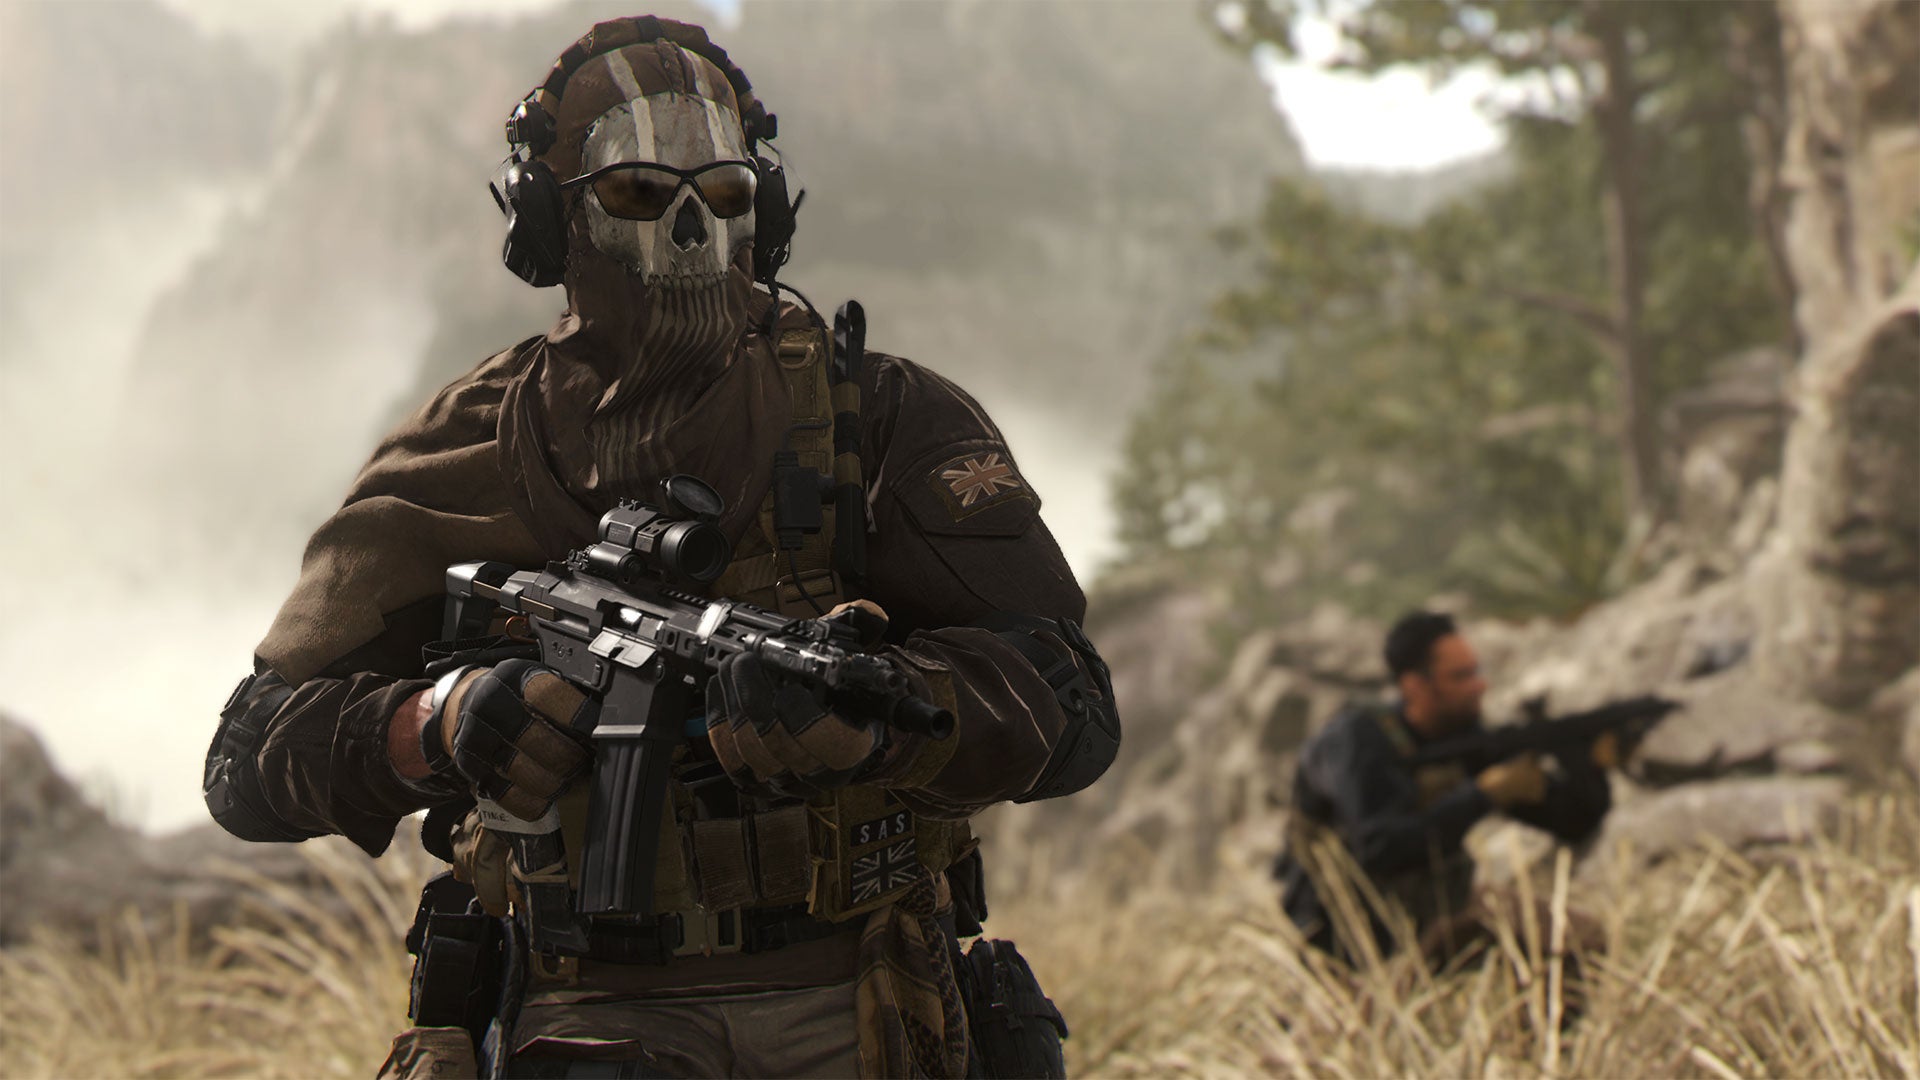 Image for PlayStation: Xbox's Call of Duty offer was "inadequate on many levels"